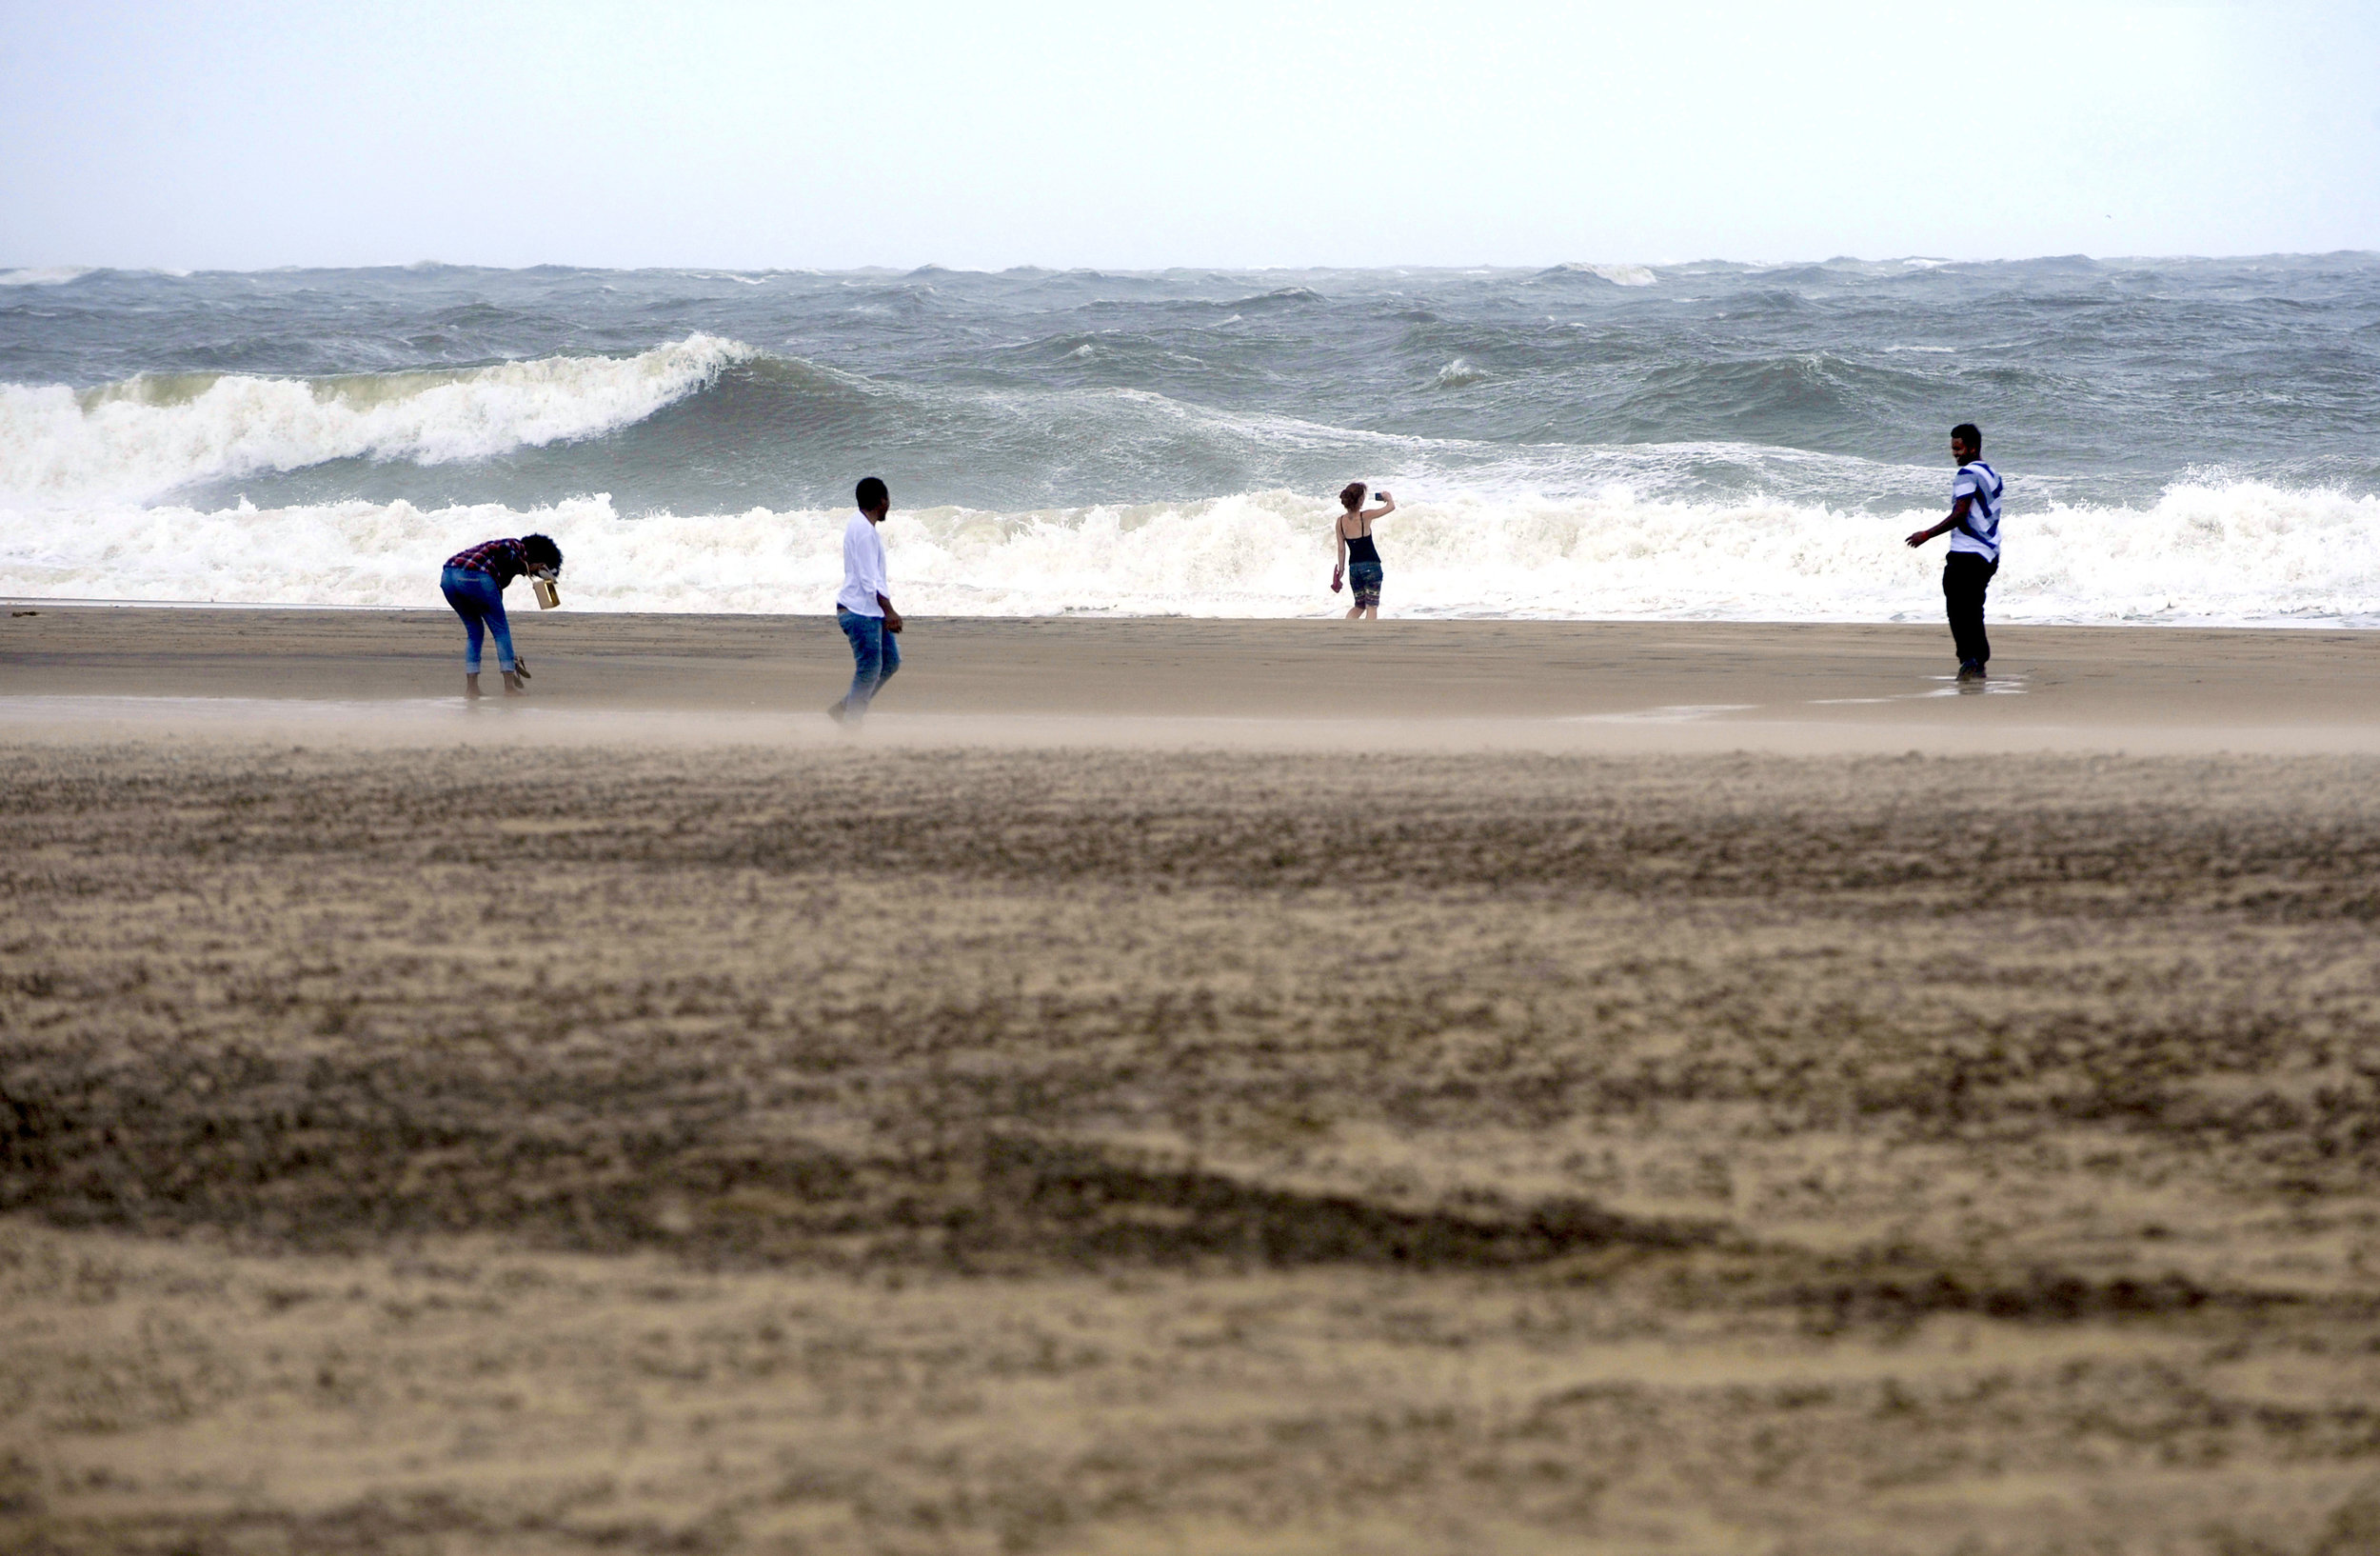  Vacationers take a trip to Ocean City, Maryland on Saturday, September 3, 2016,&nbsp;as Hermine downgraded to a post-tropical cyclone and brushed the resort town over Labor Day weekend. 